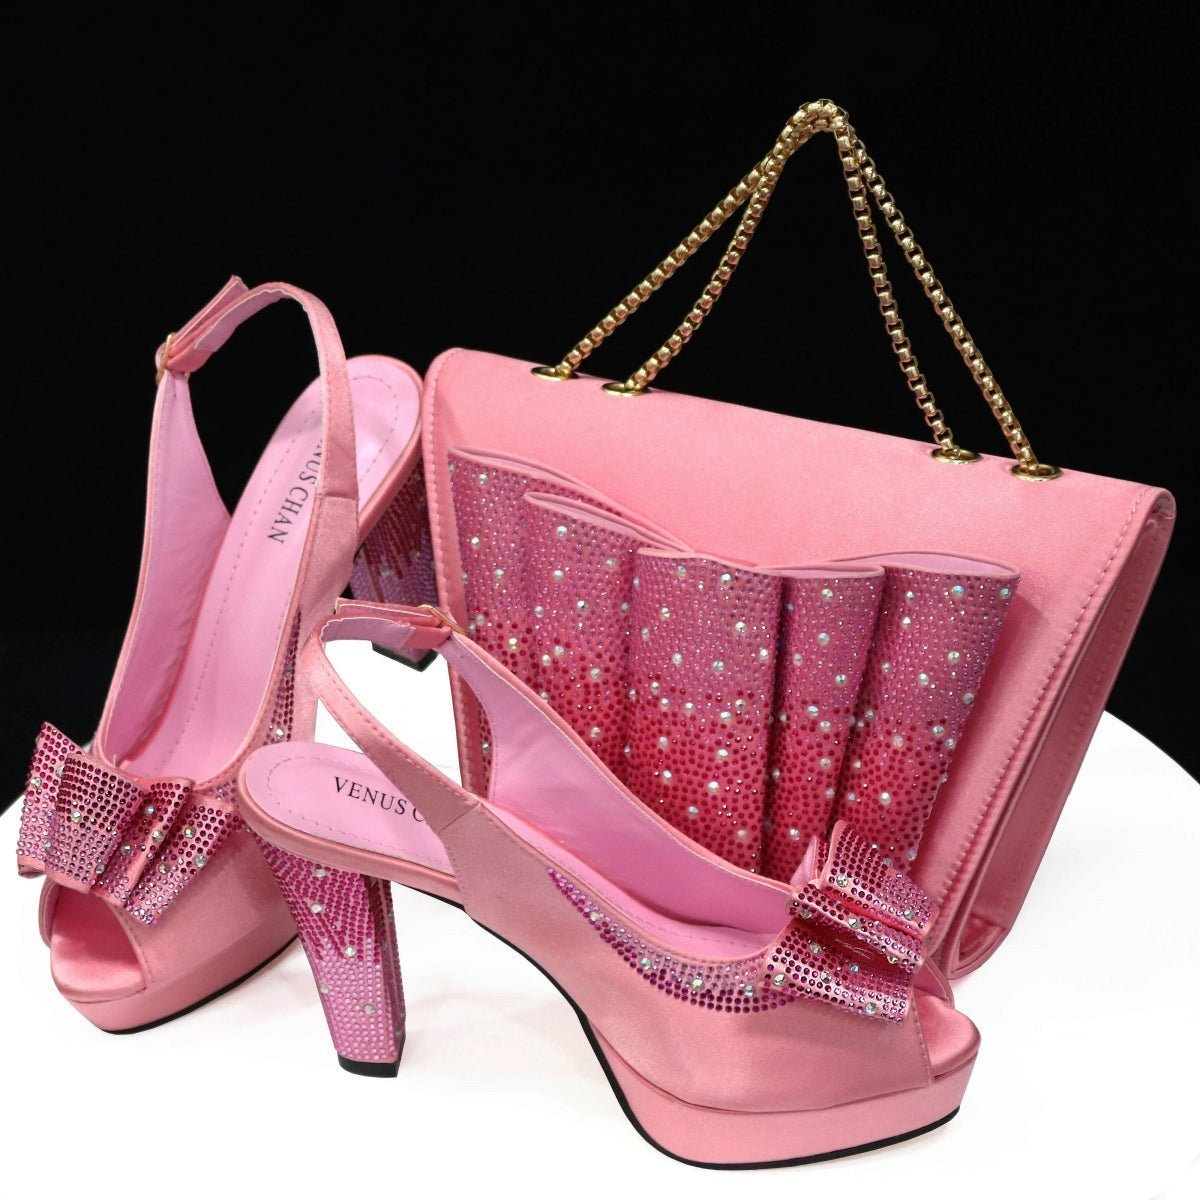 Style Harmony: Italian Shoes & Bag Set for Weddings, Parties - Pink - Women - Shoes - Milvertons